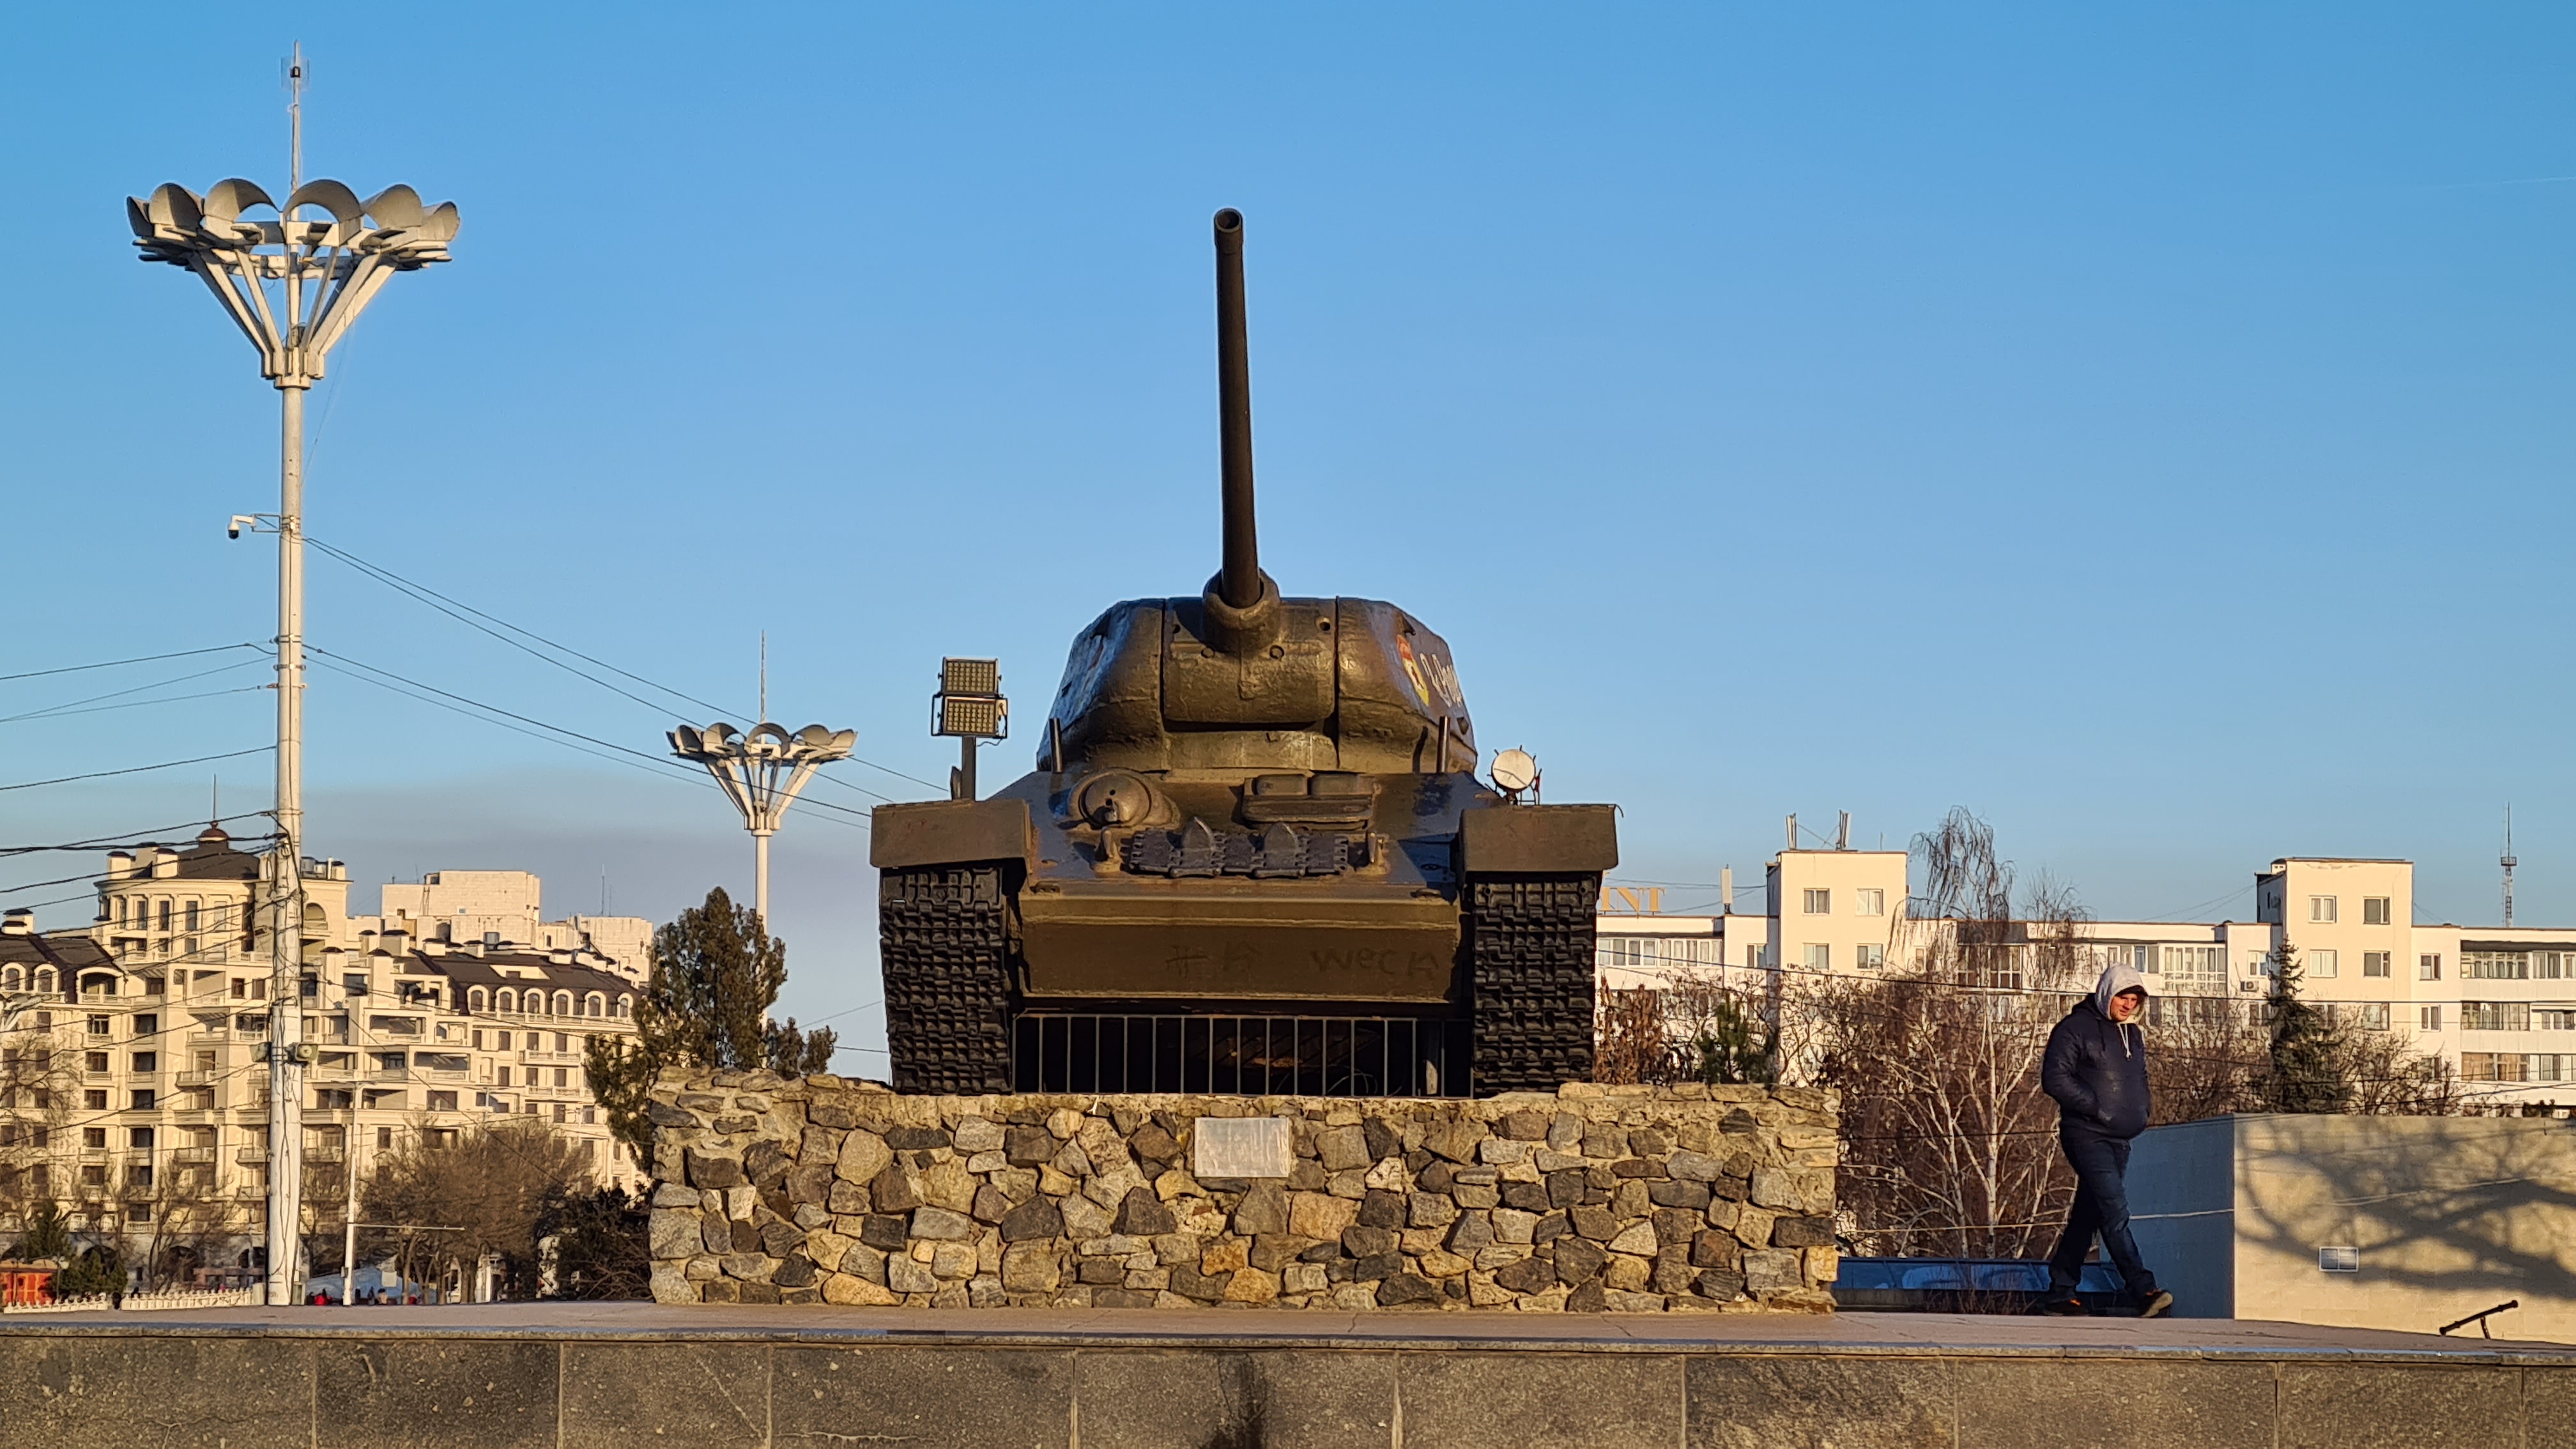 Tiraspol, Moldova – February 13, 2022: Tank Monument at Memorial of Glory located on Suvorov Square of Tiraspol, the capital of Transnistria. The tank is a T-34-85 model which participated in the IIWW.